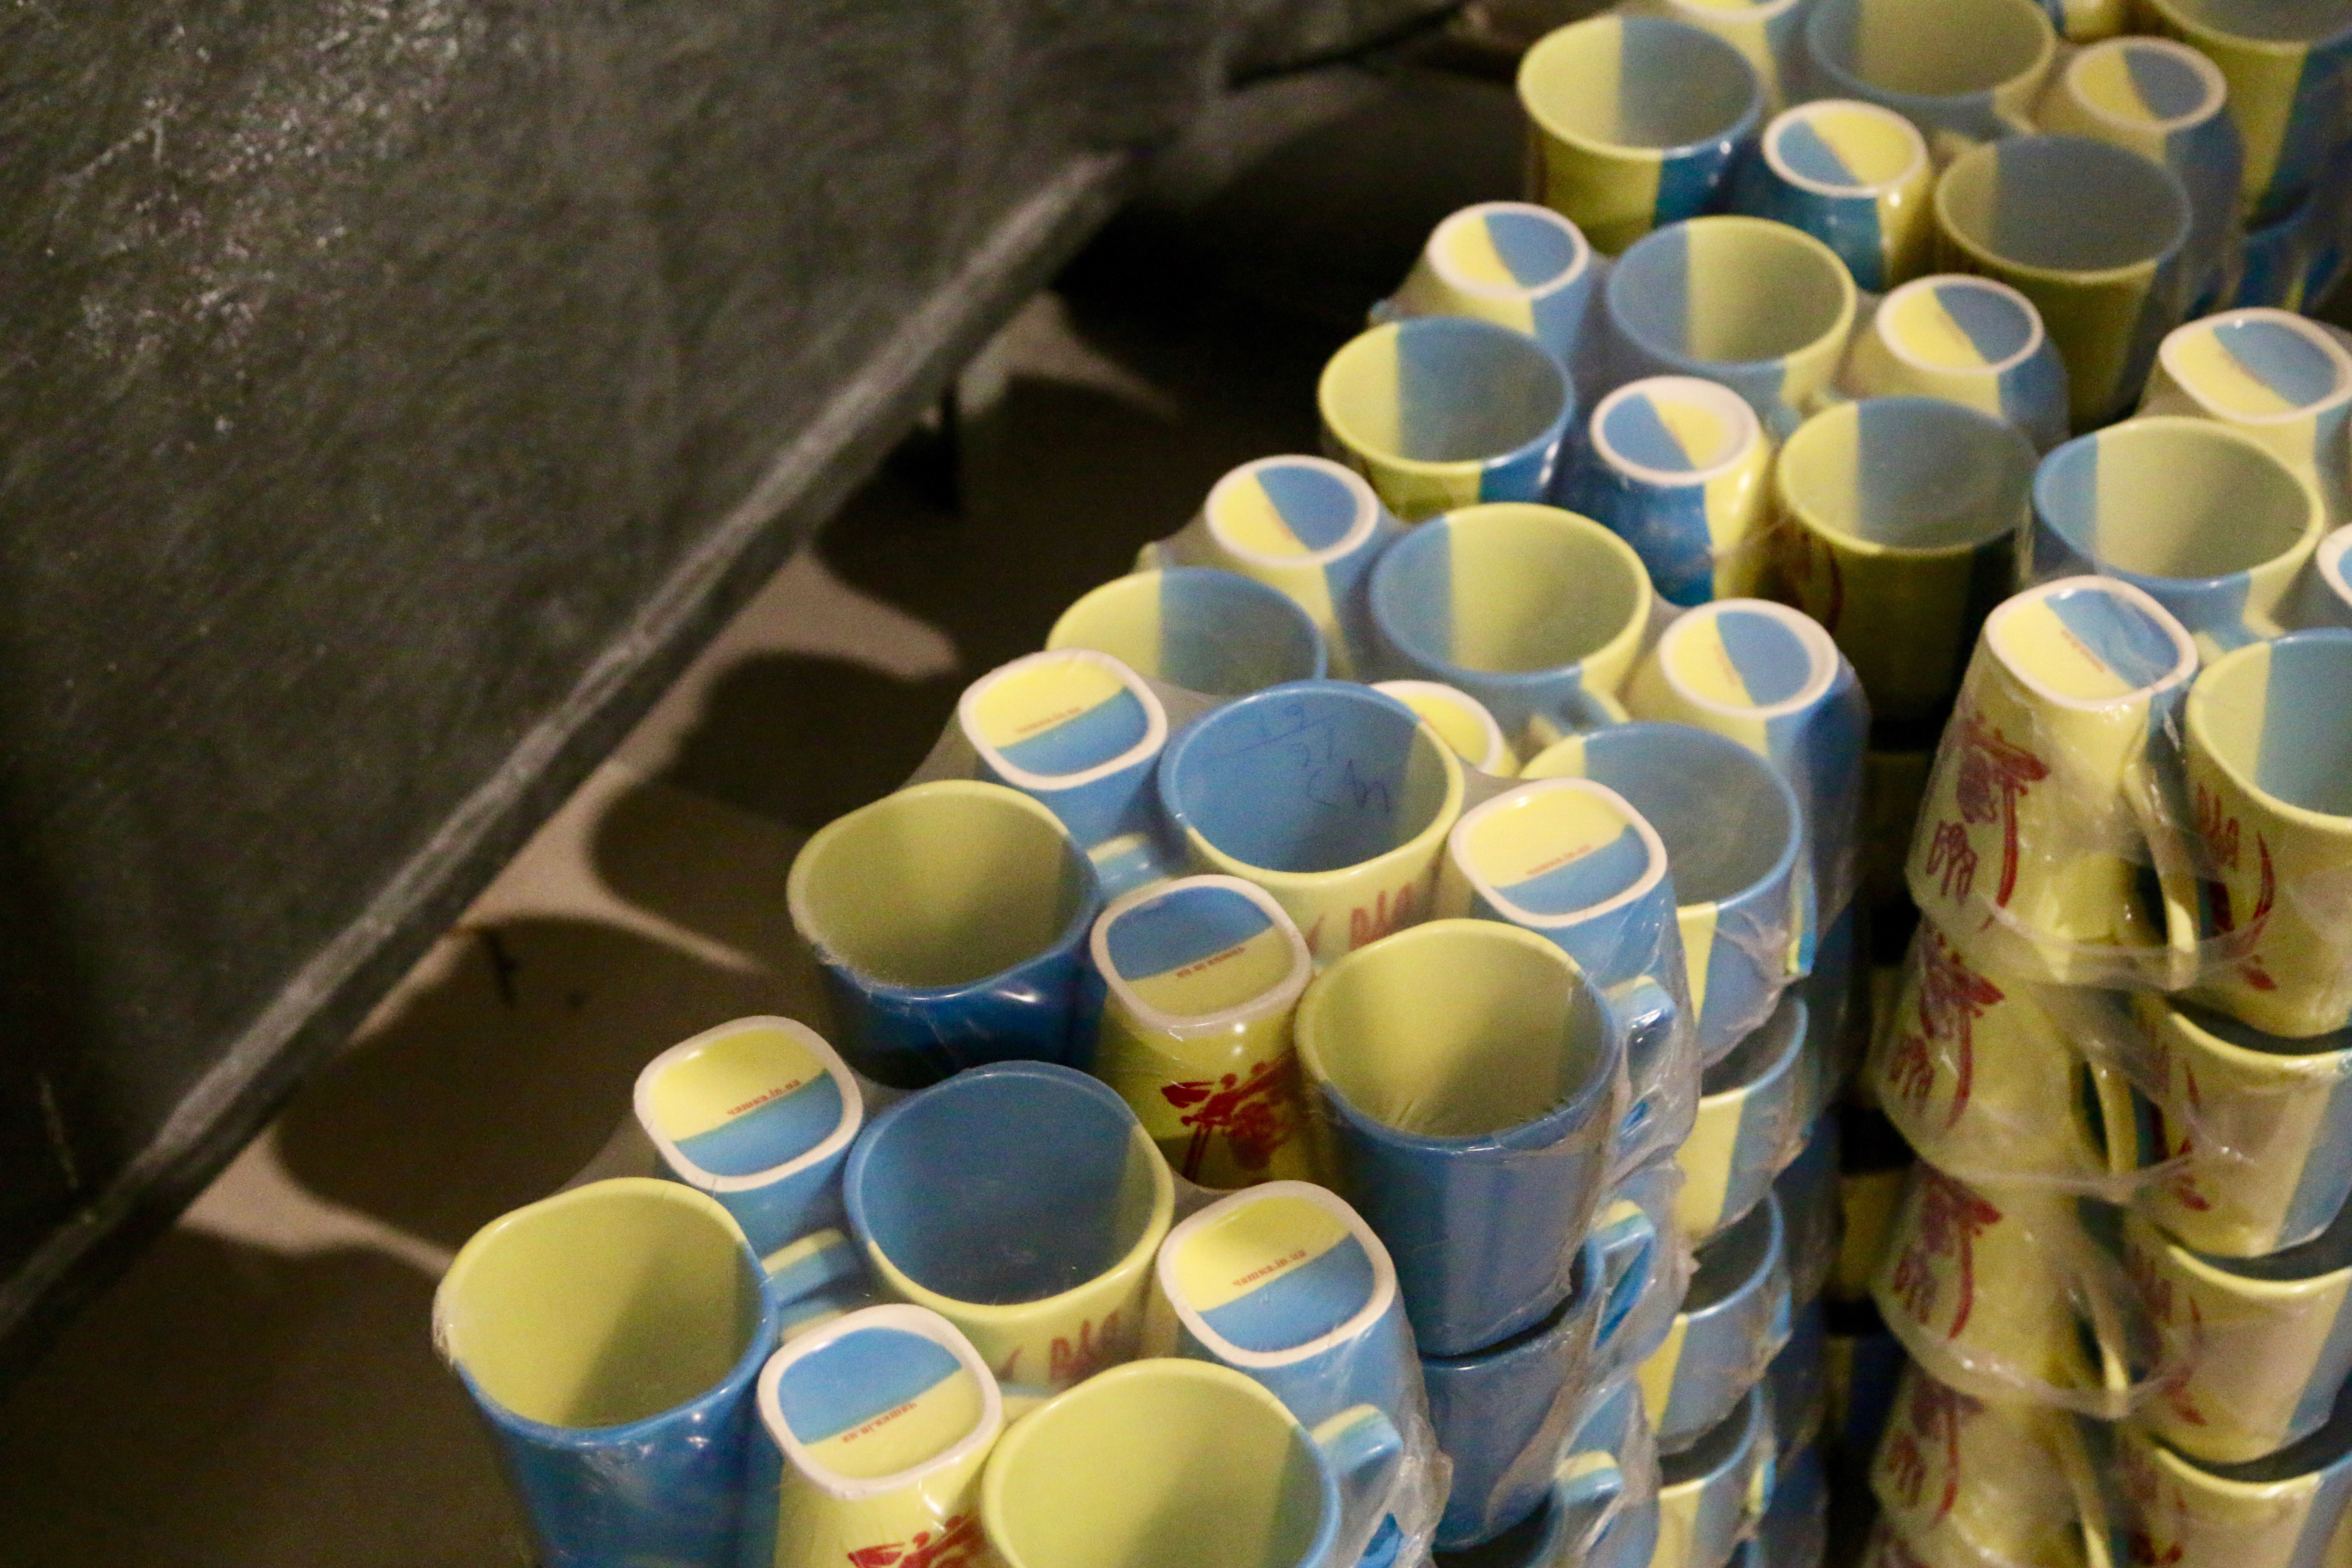 Olexandr Ivanovich Poligenko’s blue and yellow coffee mugs—Ukraine’s national colors—have become ubiquitous throughout the war zone.